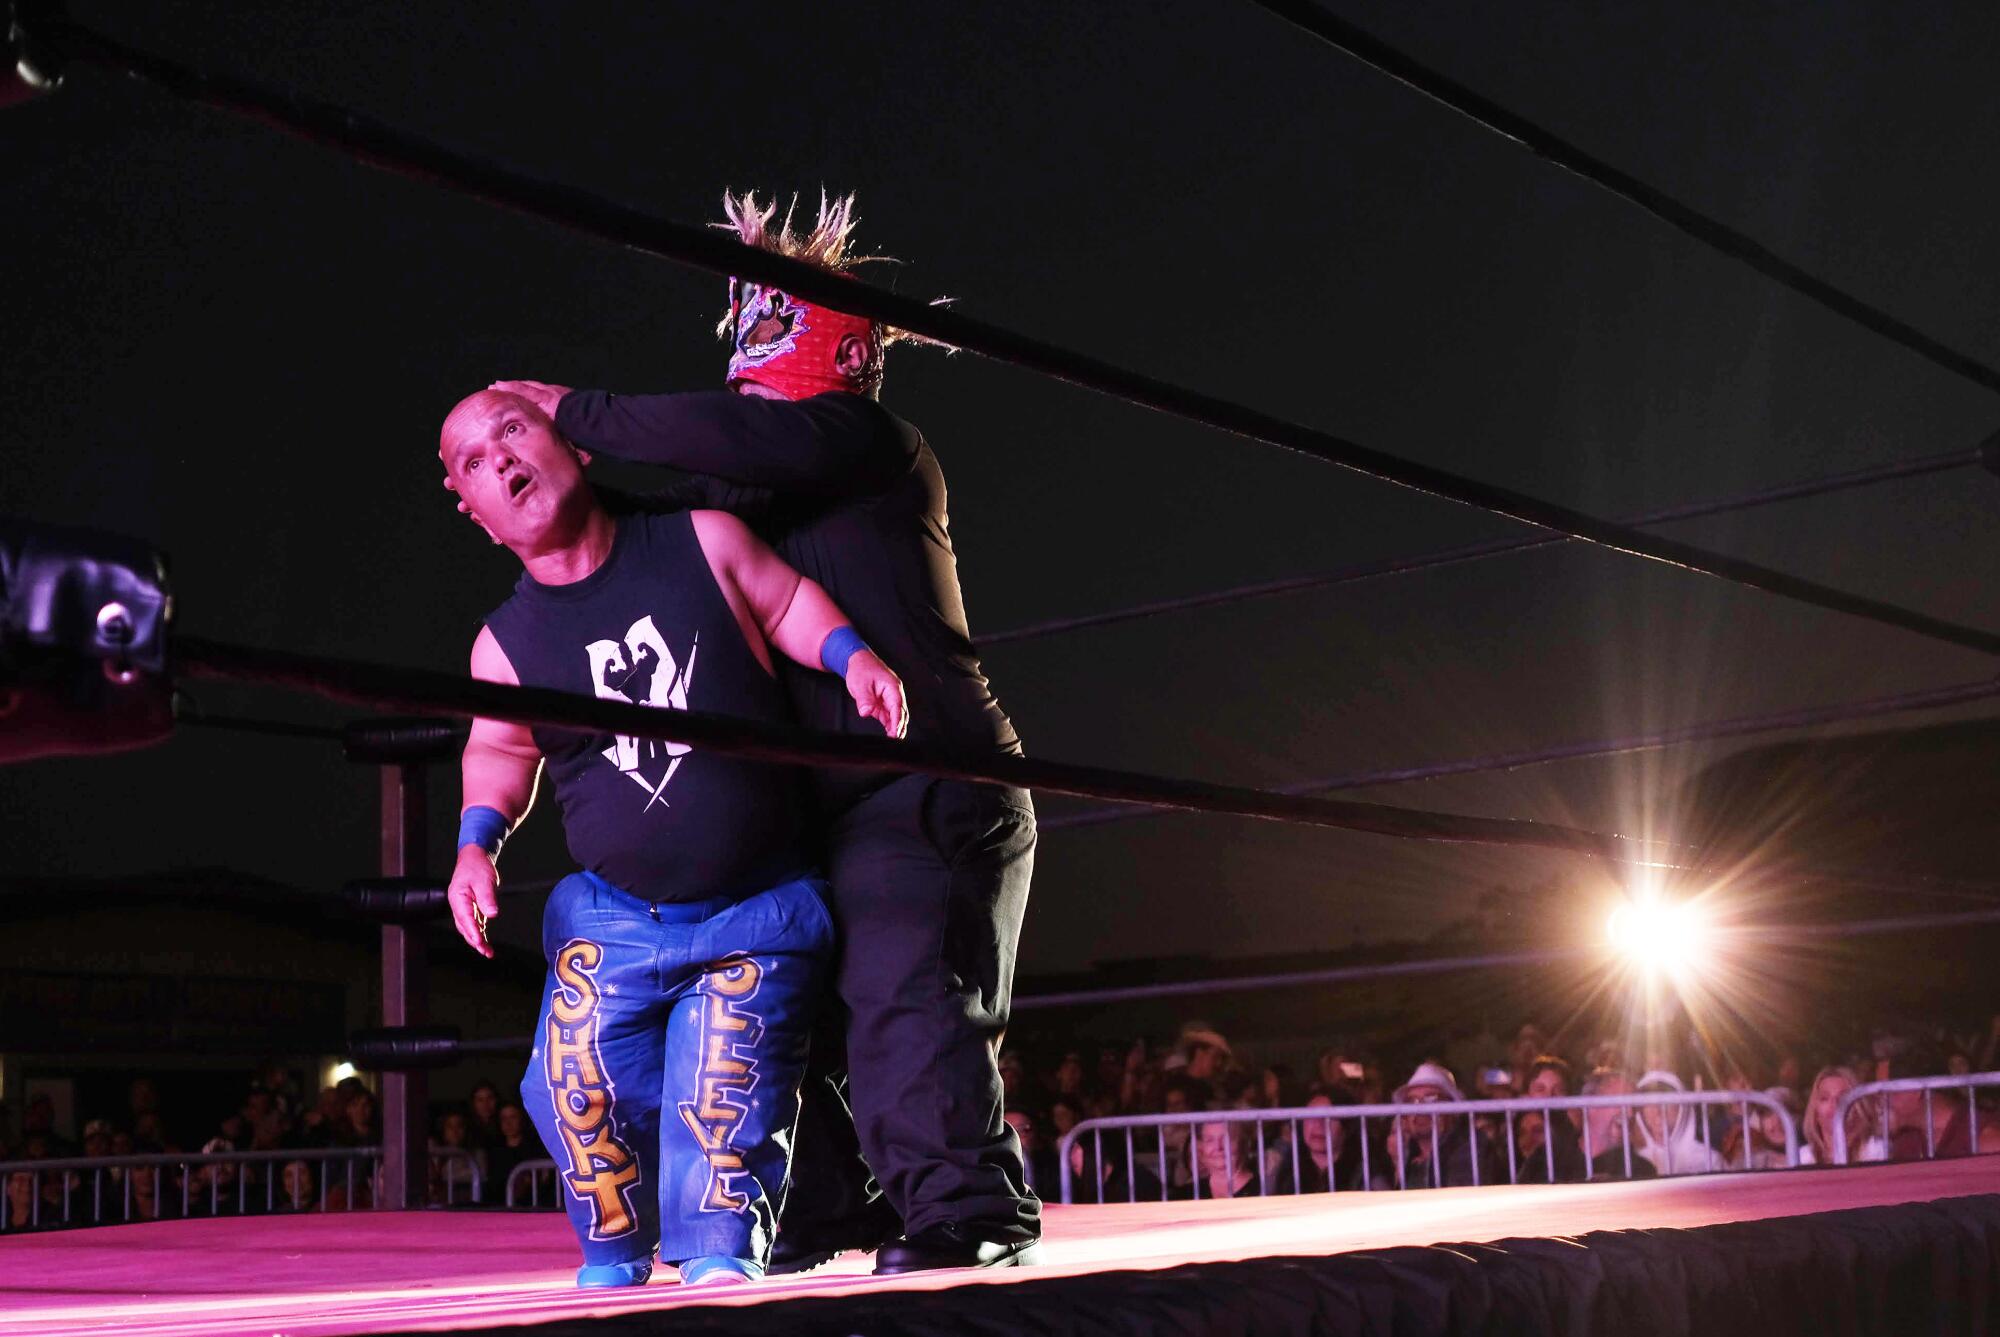 A person grabs the head of another person in a wrestling ring.